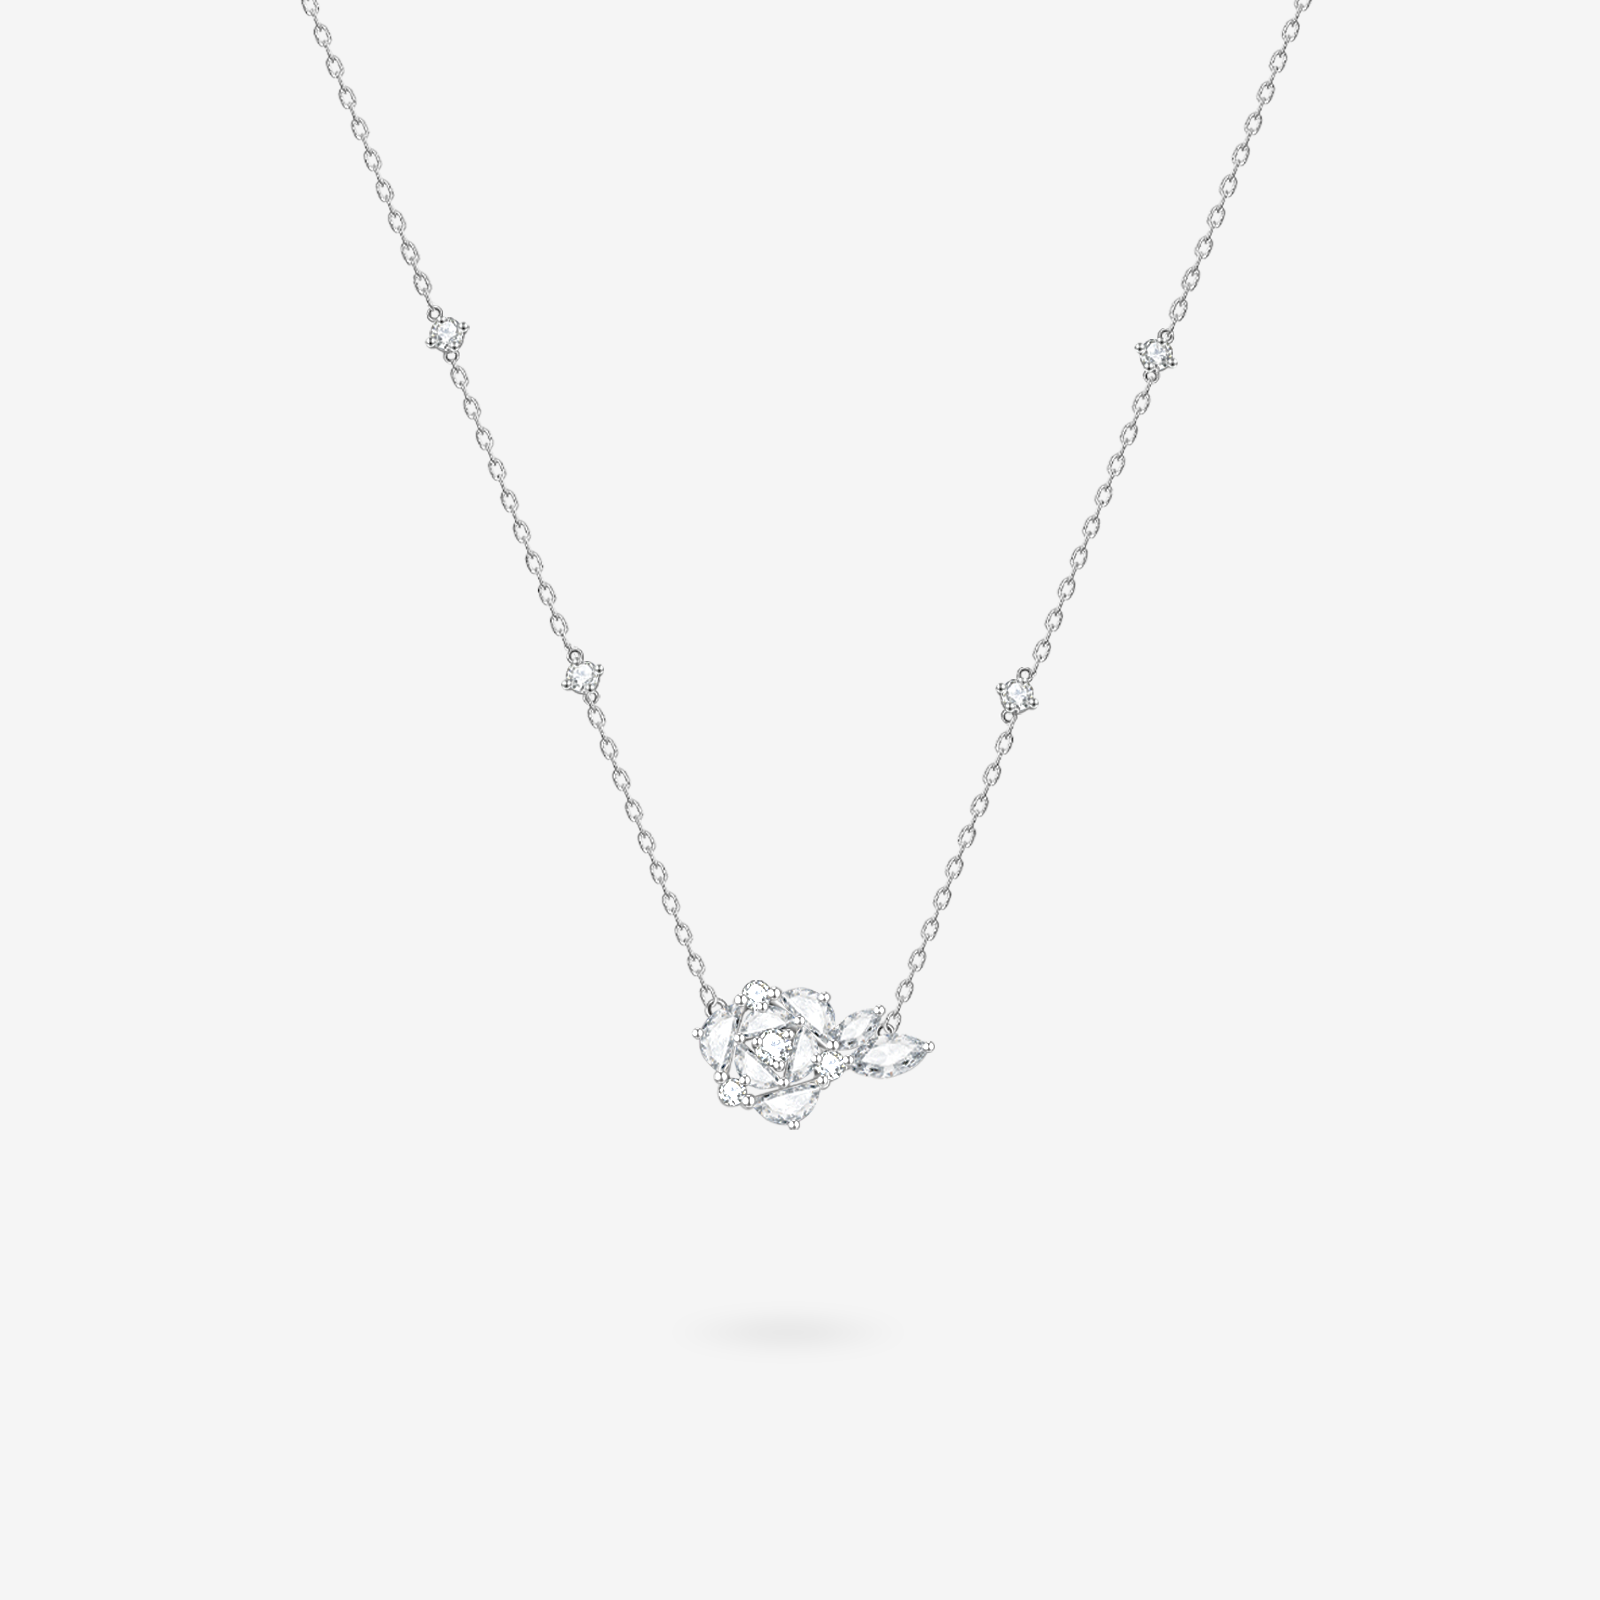 FANCI ME "One Rose" Sterling Silver Necklace Main